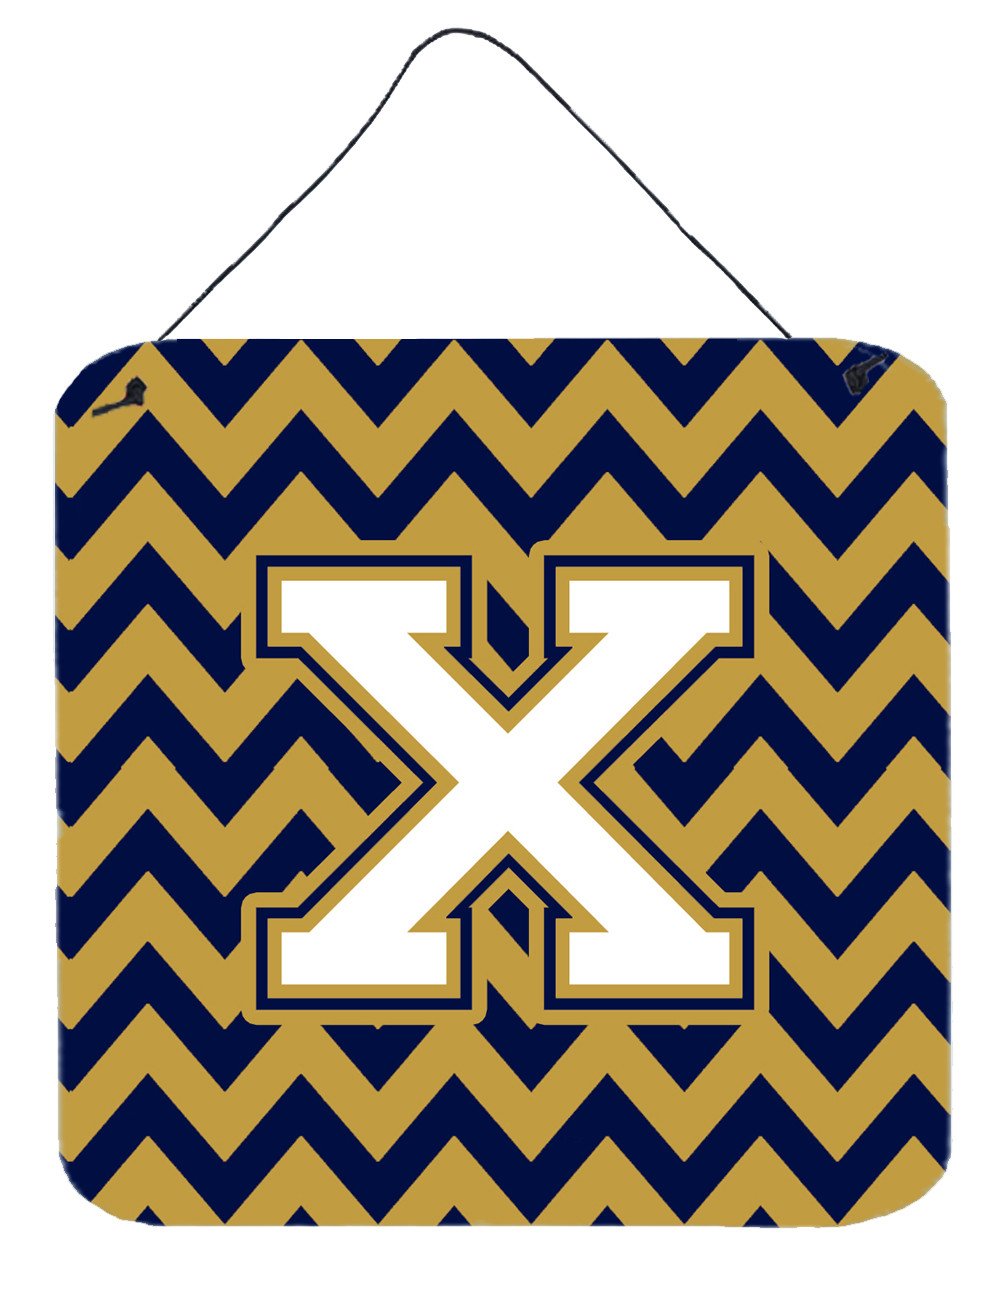 Letter X Chevron Navy Blue and Gold Wall or Door Hanging Prints CJ1057-XDS66 by Caroline's Treasures